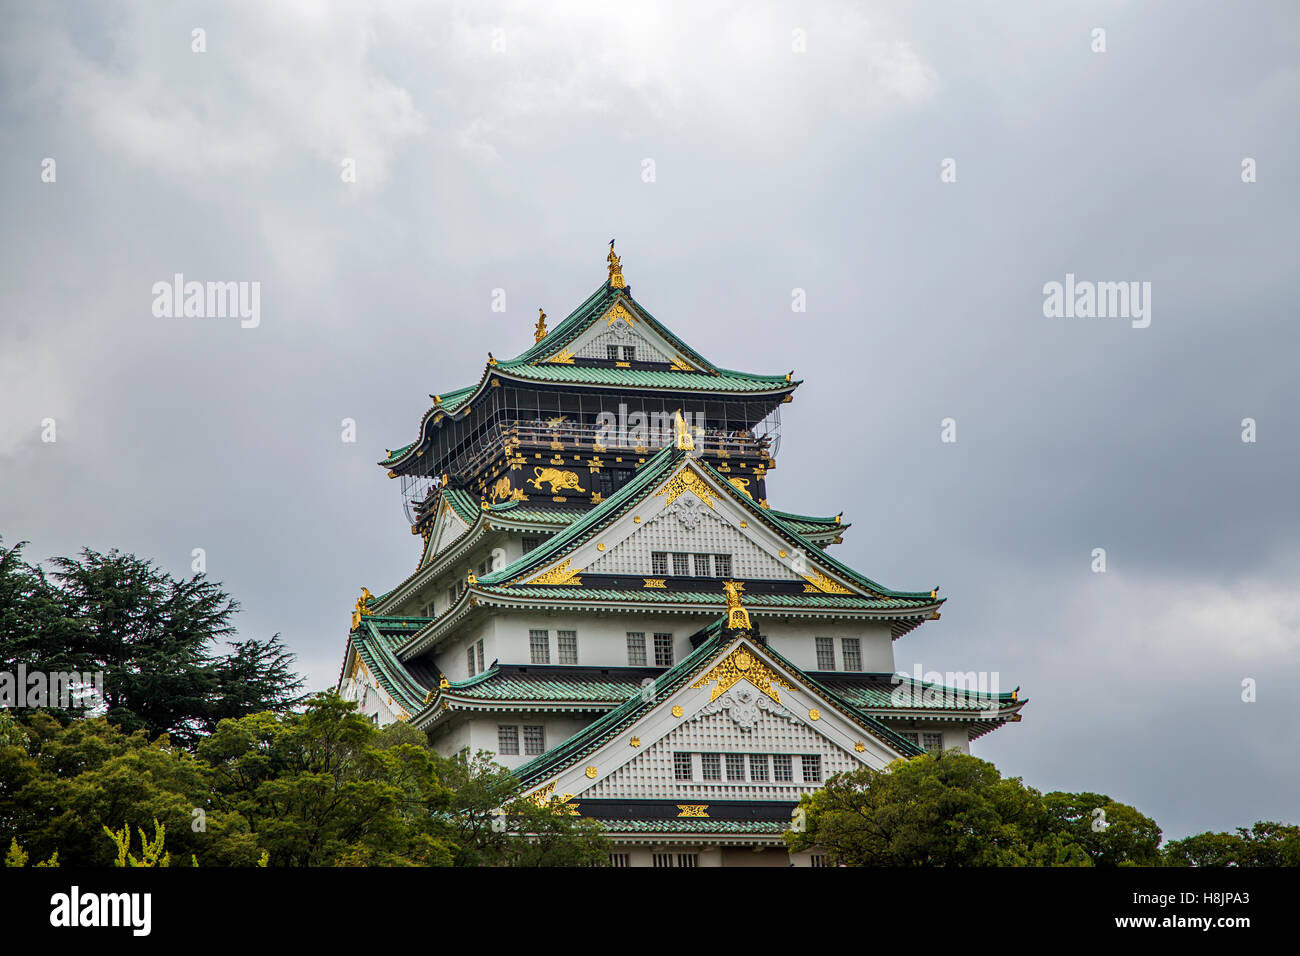 View at the Osaka castle in Japan Stock Photo